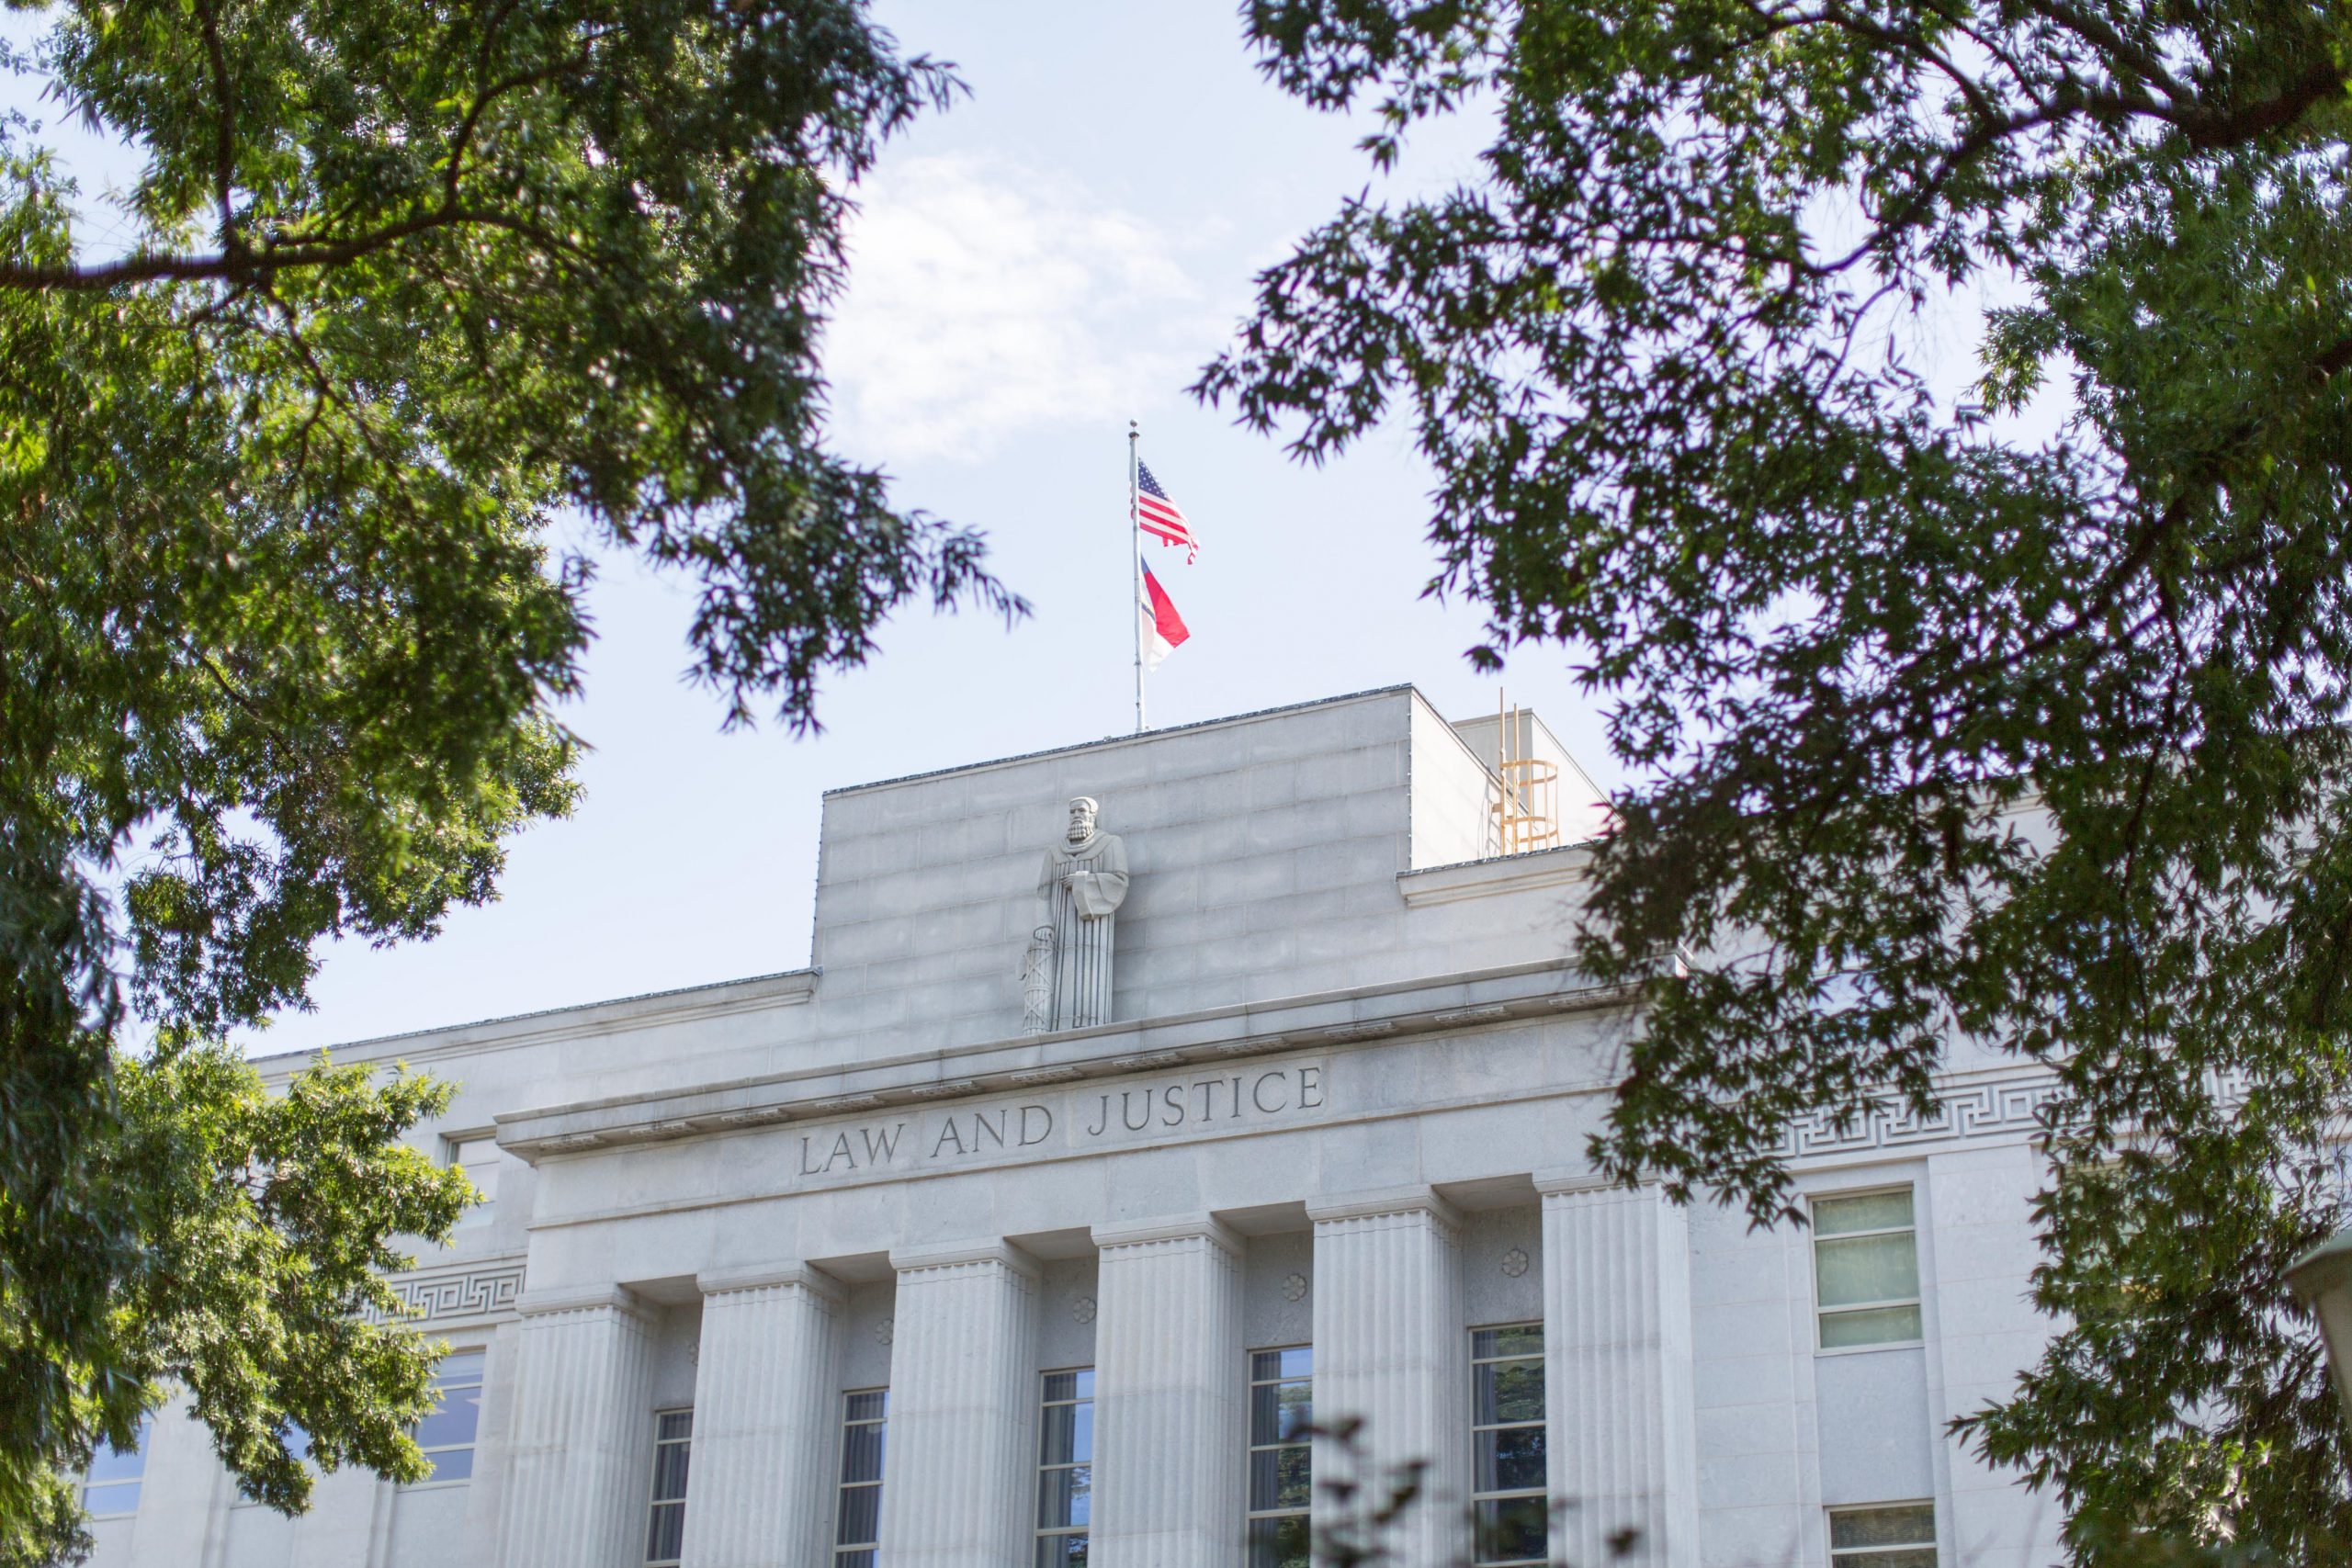 NC Supreme Court Building with American and State Flag, seen through the trees